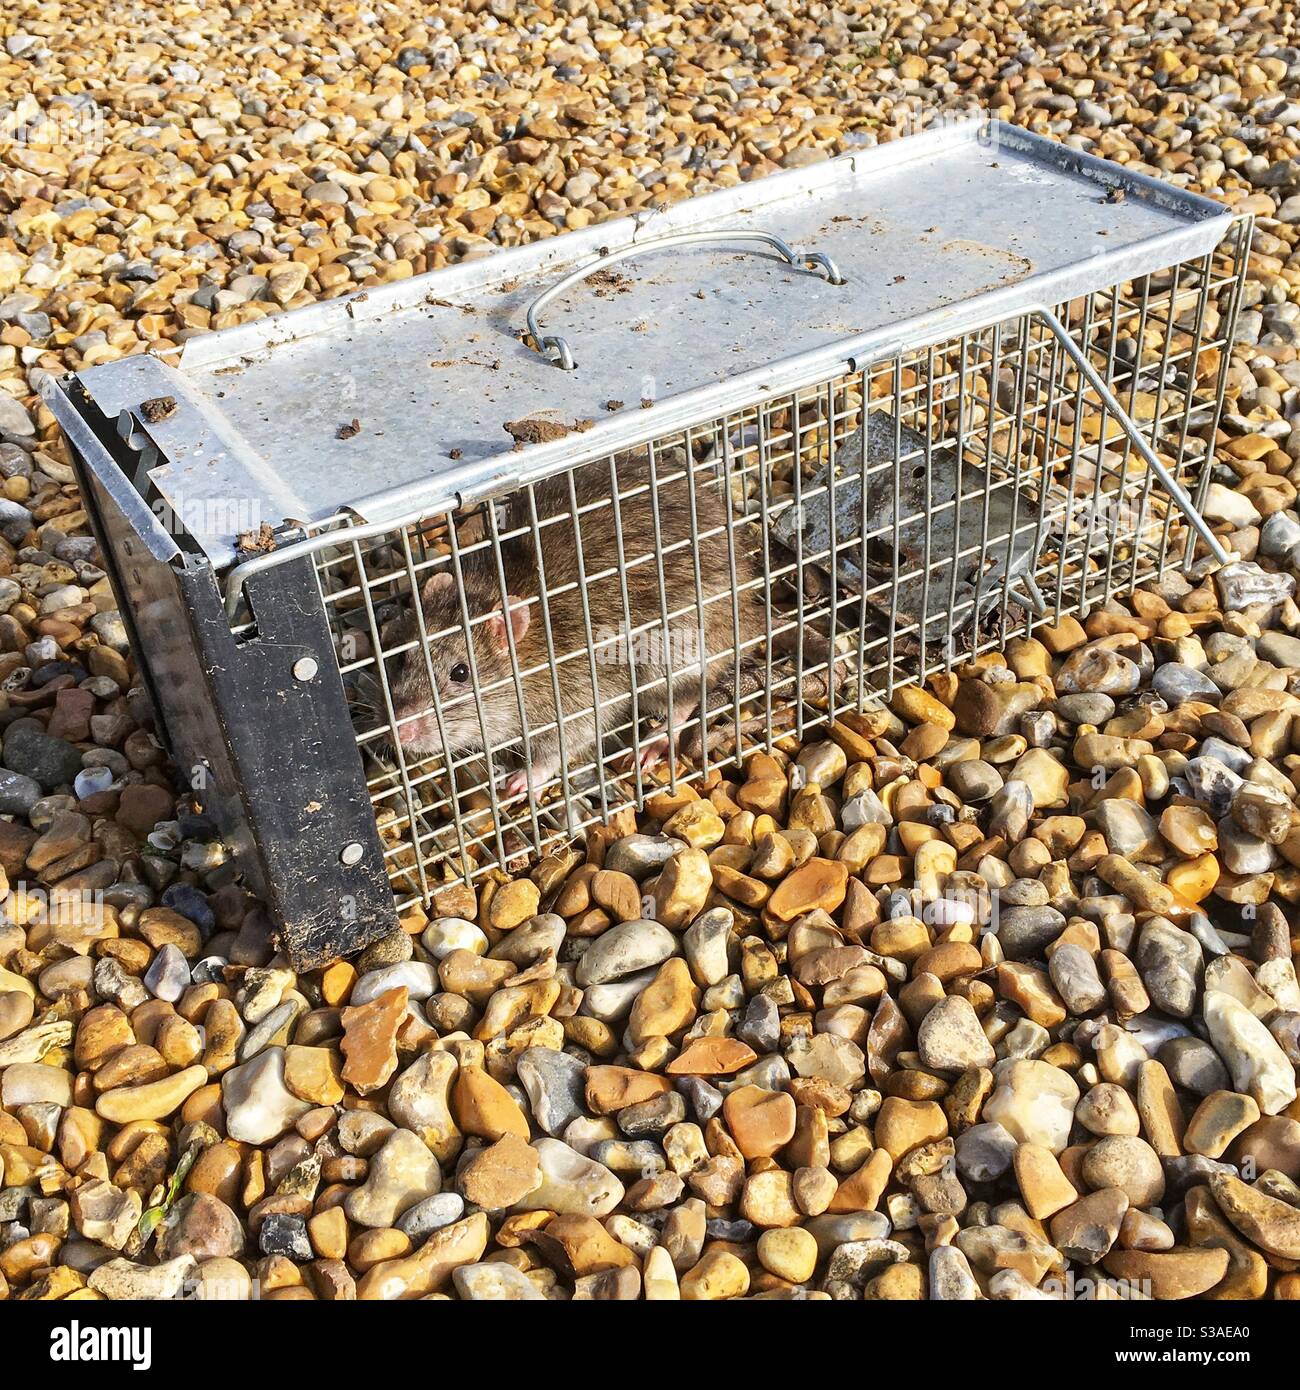 Rat caught in a humane trap, Hampshire, England, United Kingdom. Stock Photo